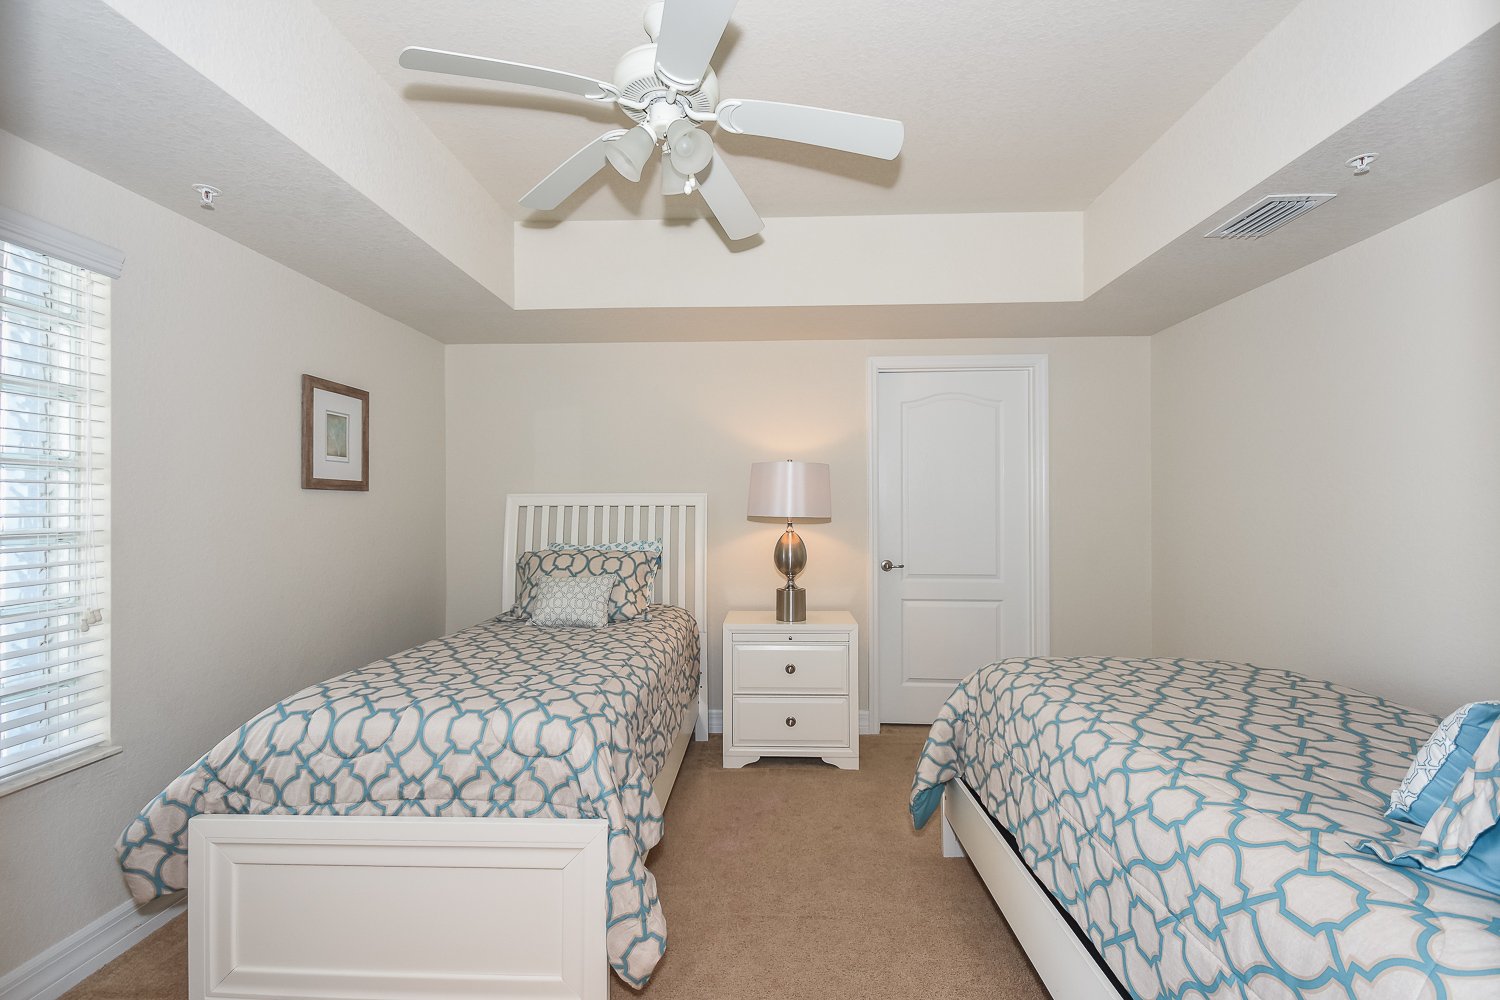 Bedroom with two twin size beds, nightstand, lamp, and ceiling fan